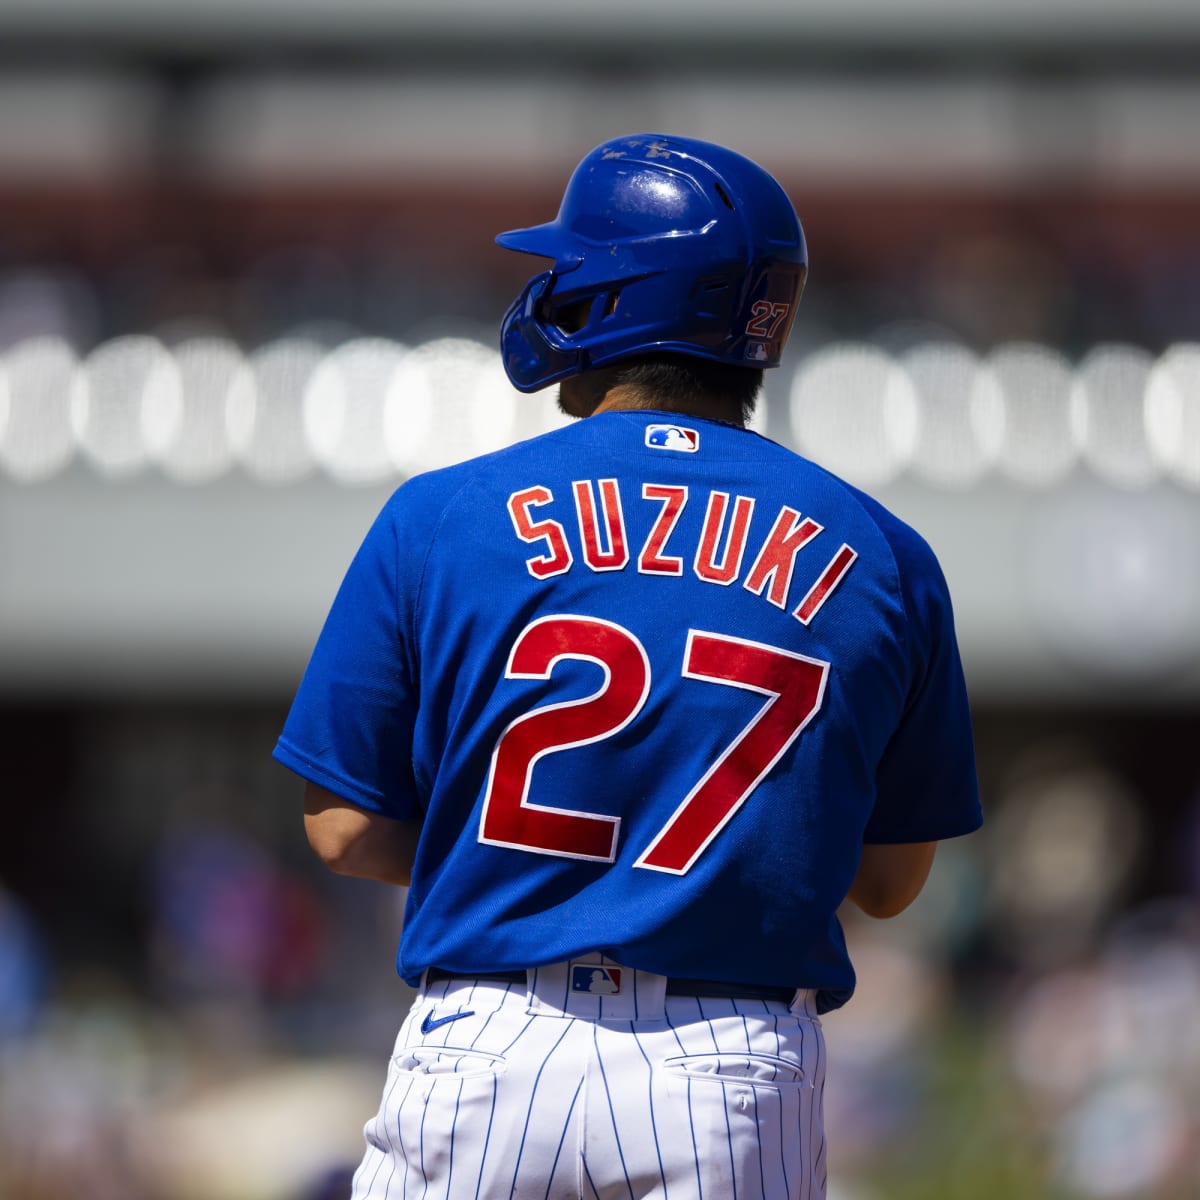 Cubs & White Sox: Teams open spring training on Wednesday